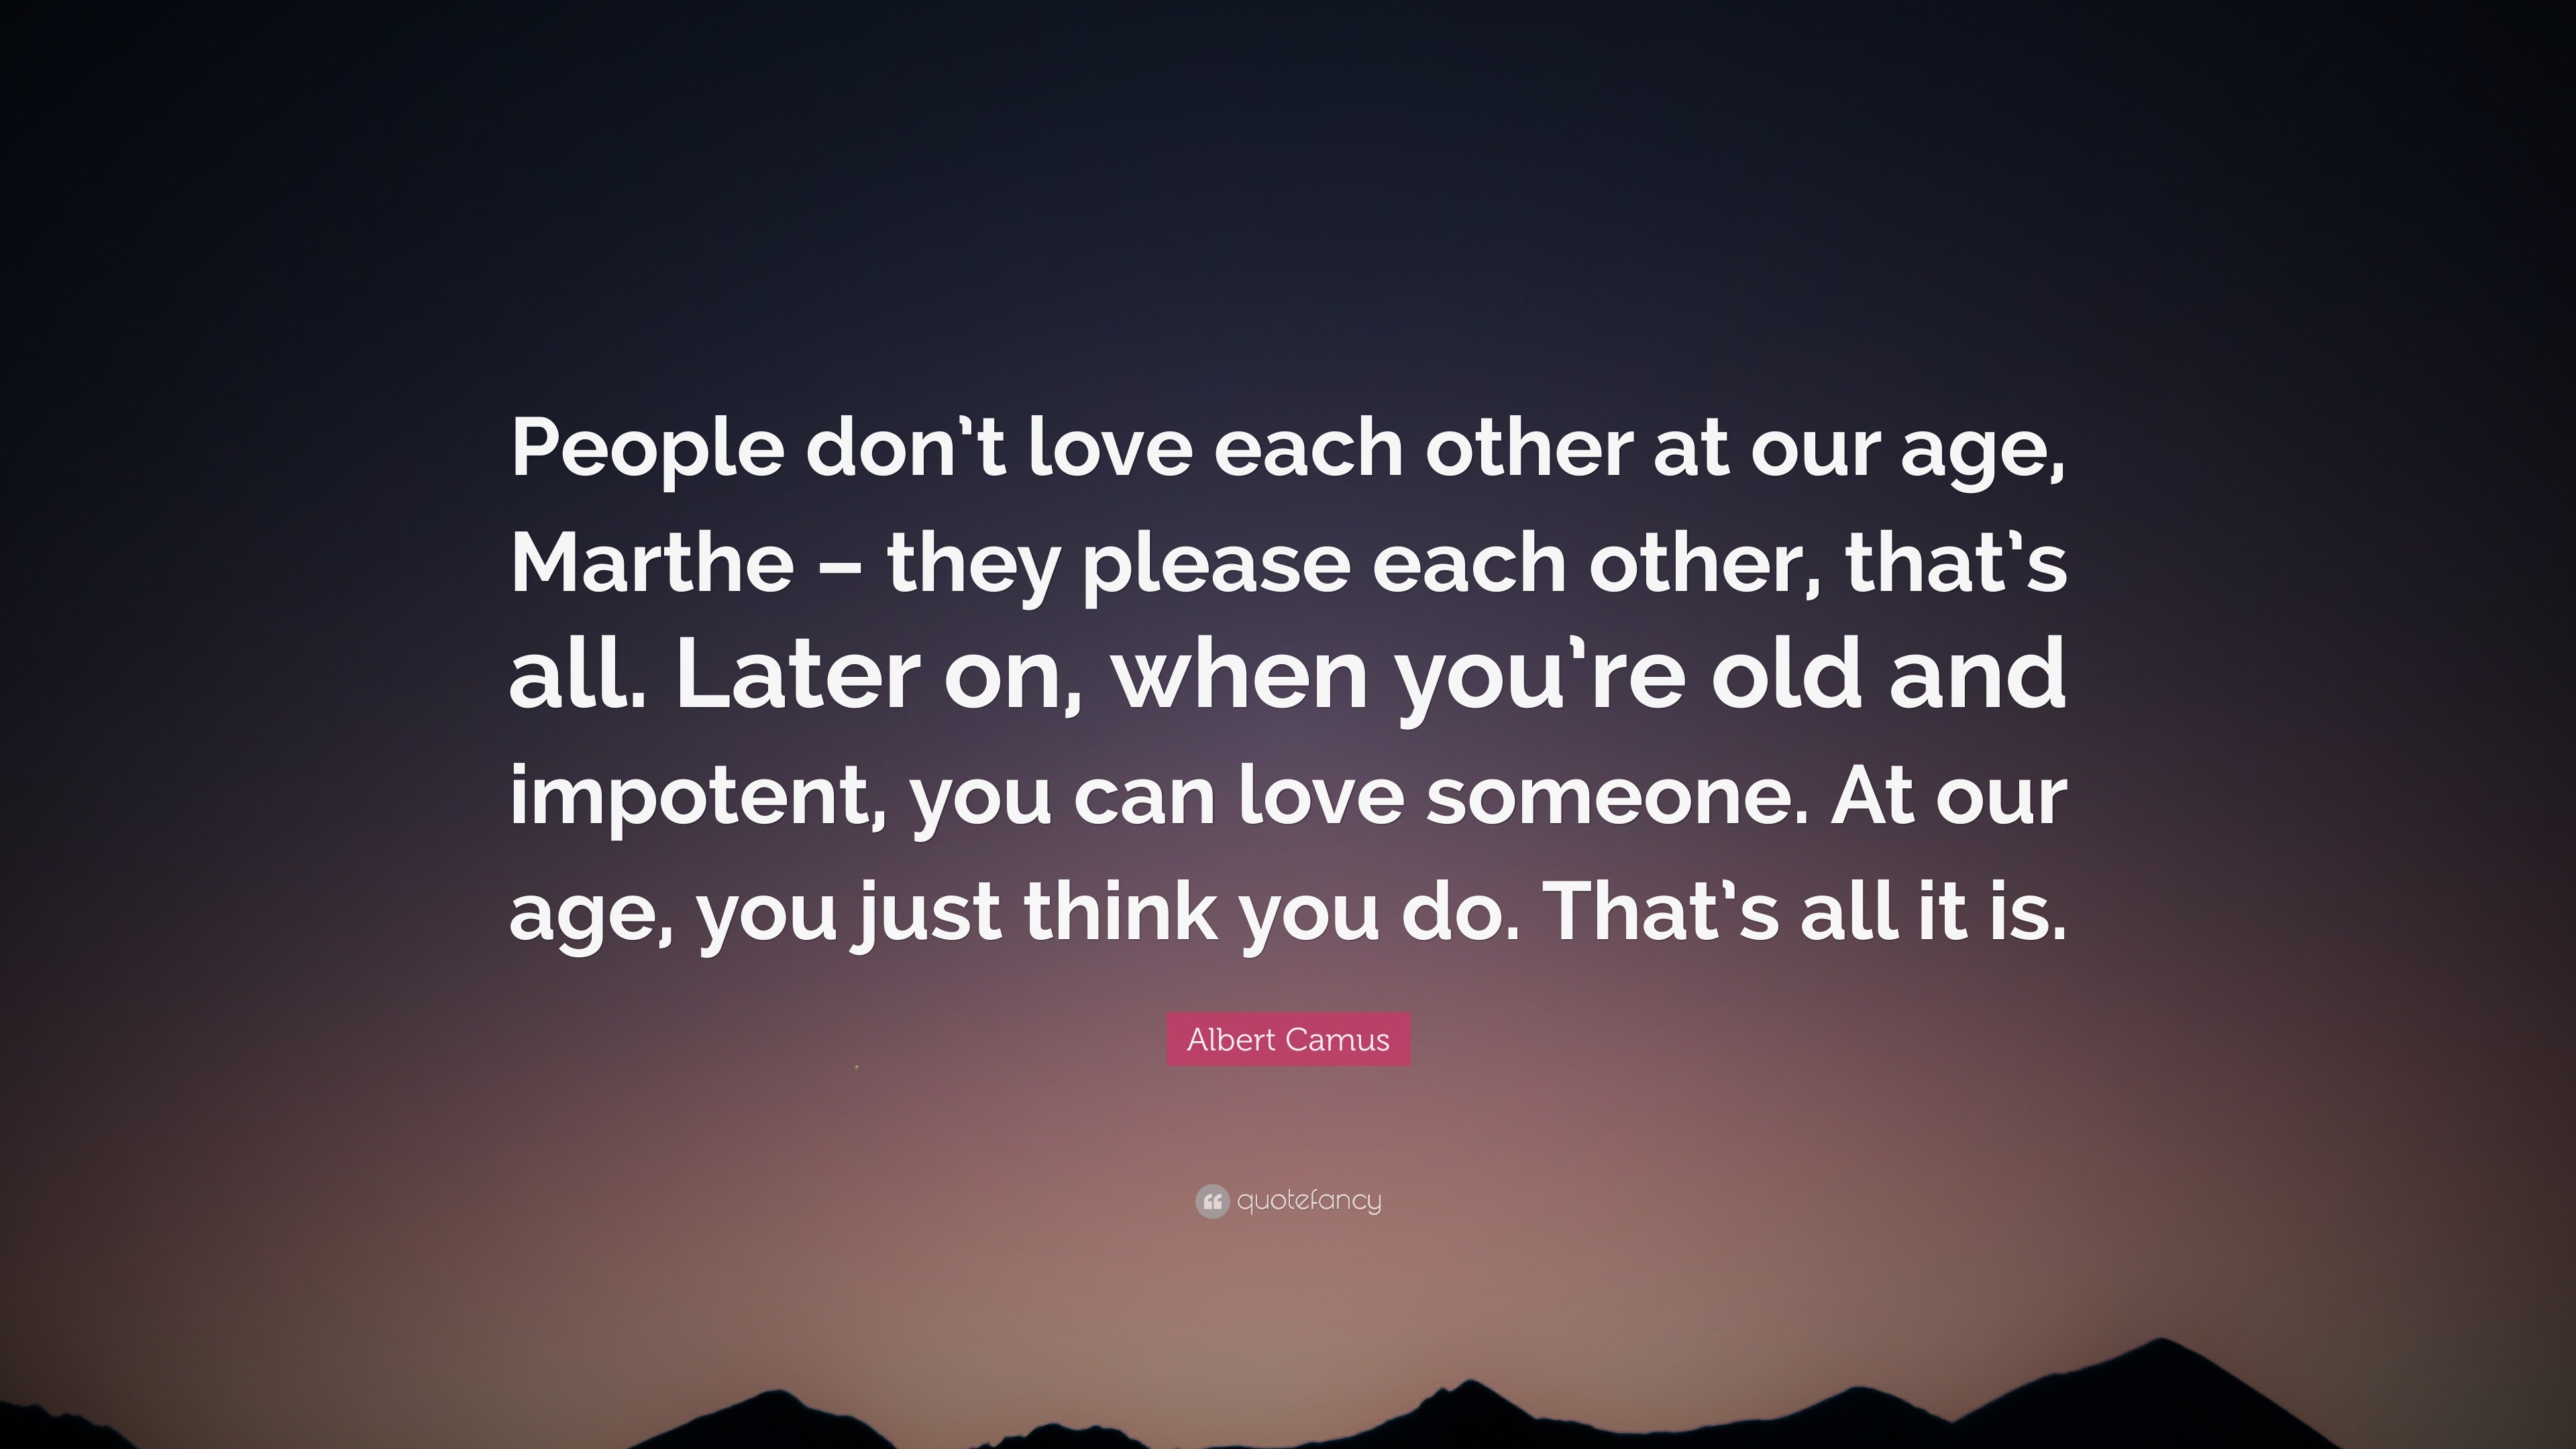 Albert Camus Quote “People don t love each other at our age